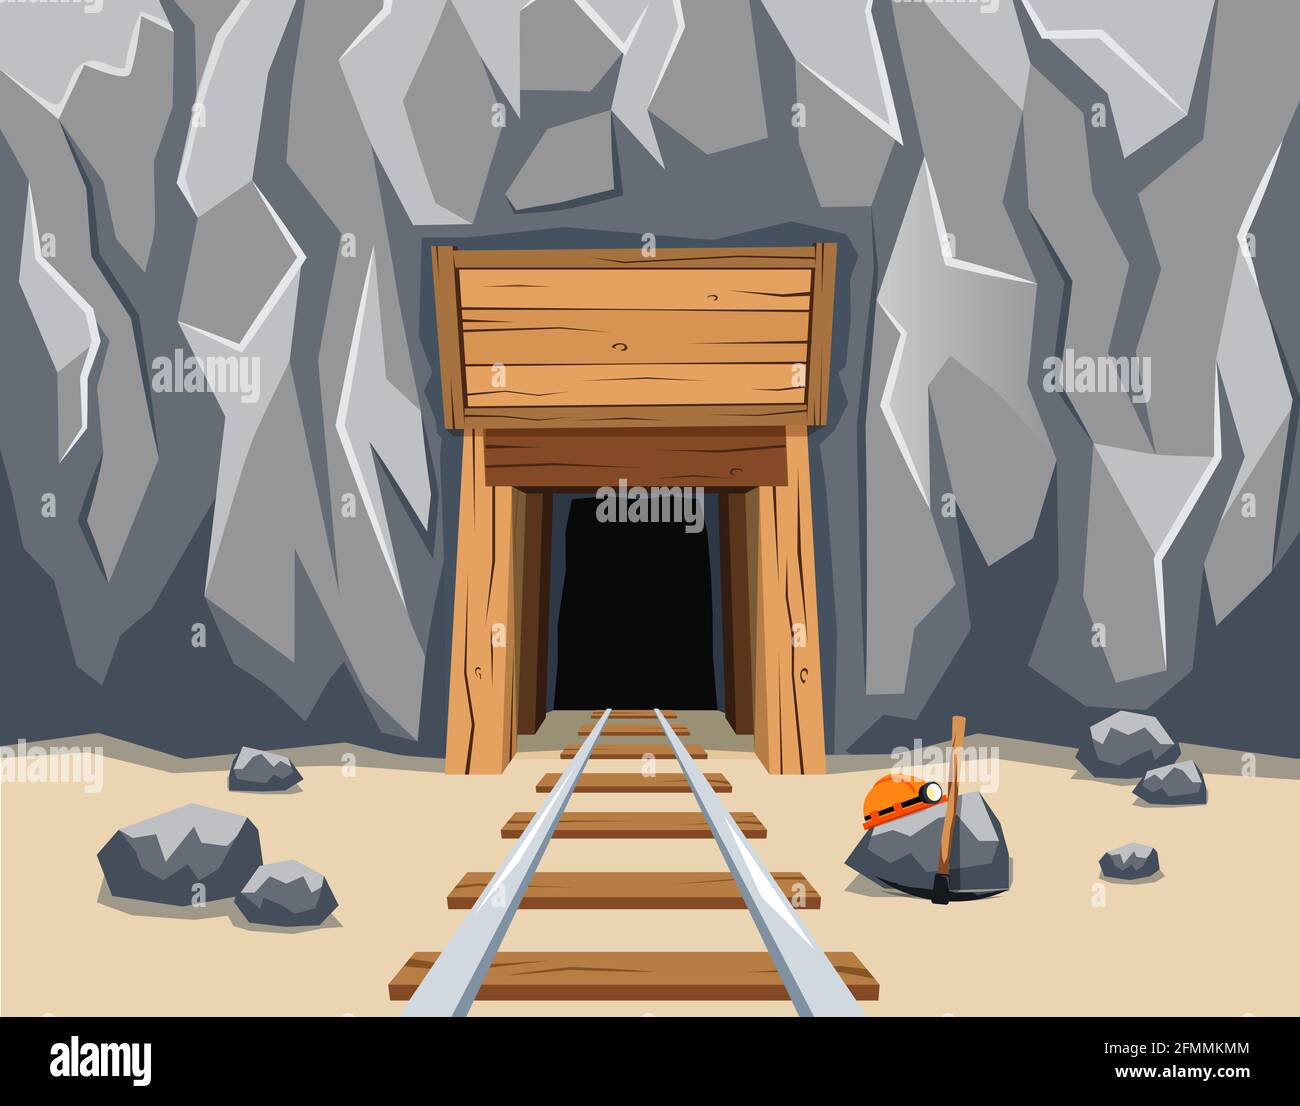 Funny entrance Stock Vector Images - Alamy